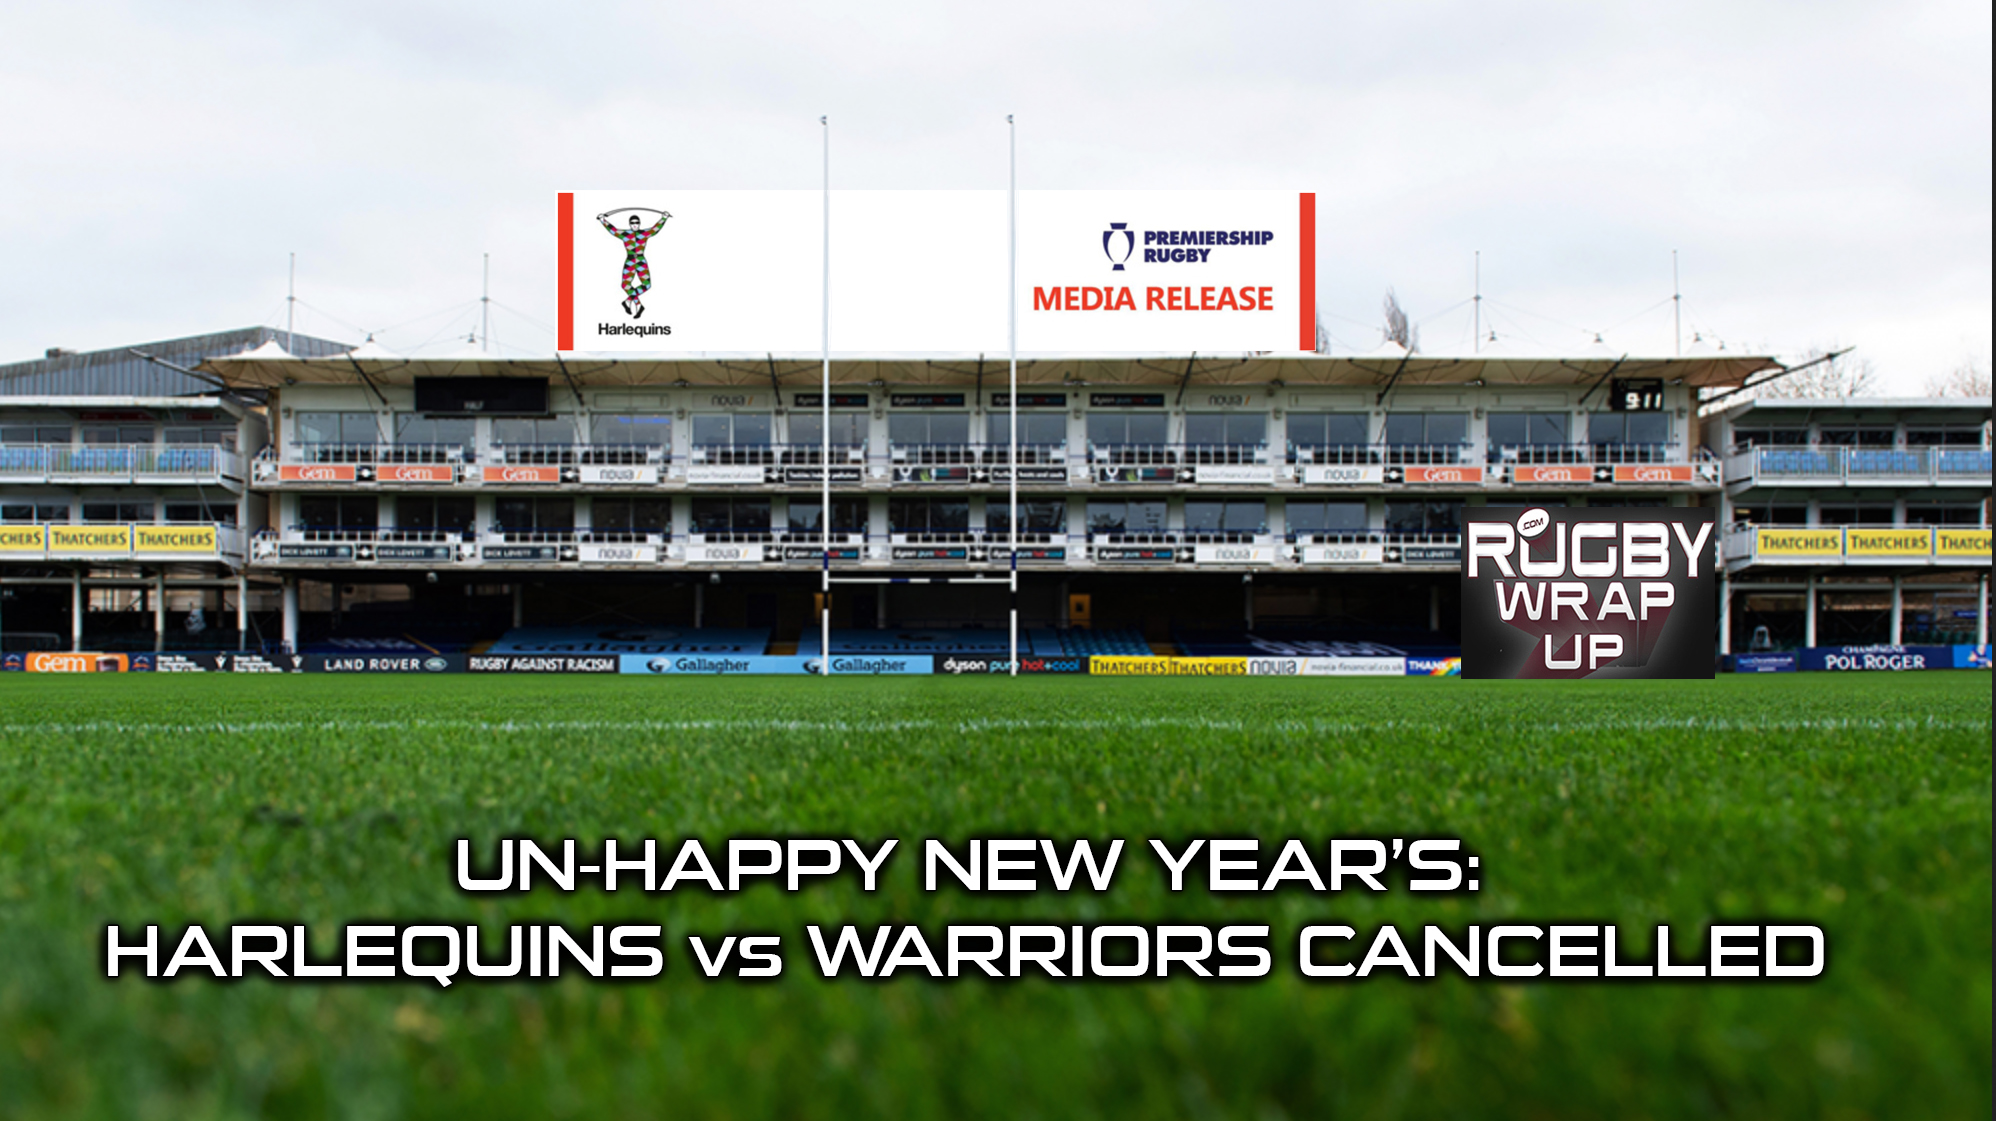 Harlequins vs Warriors, Premiership, Gallagher Rugby, Rugby-Wrap-Up